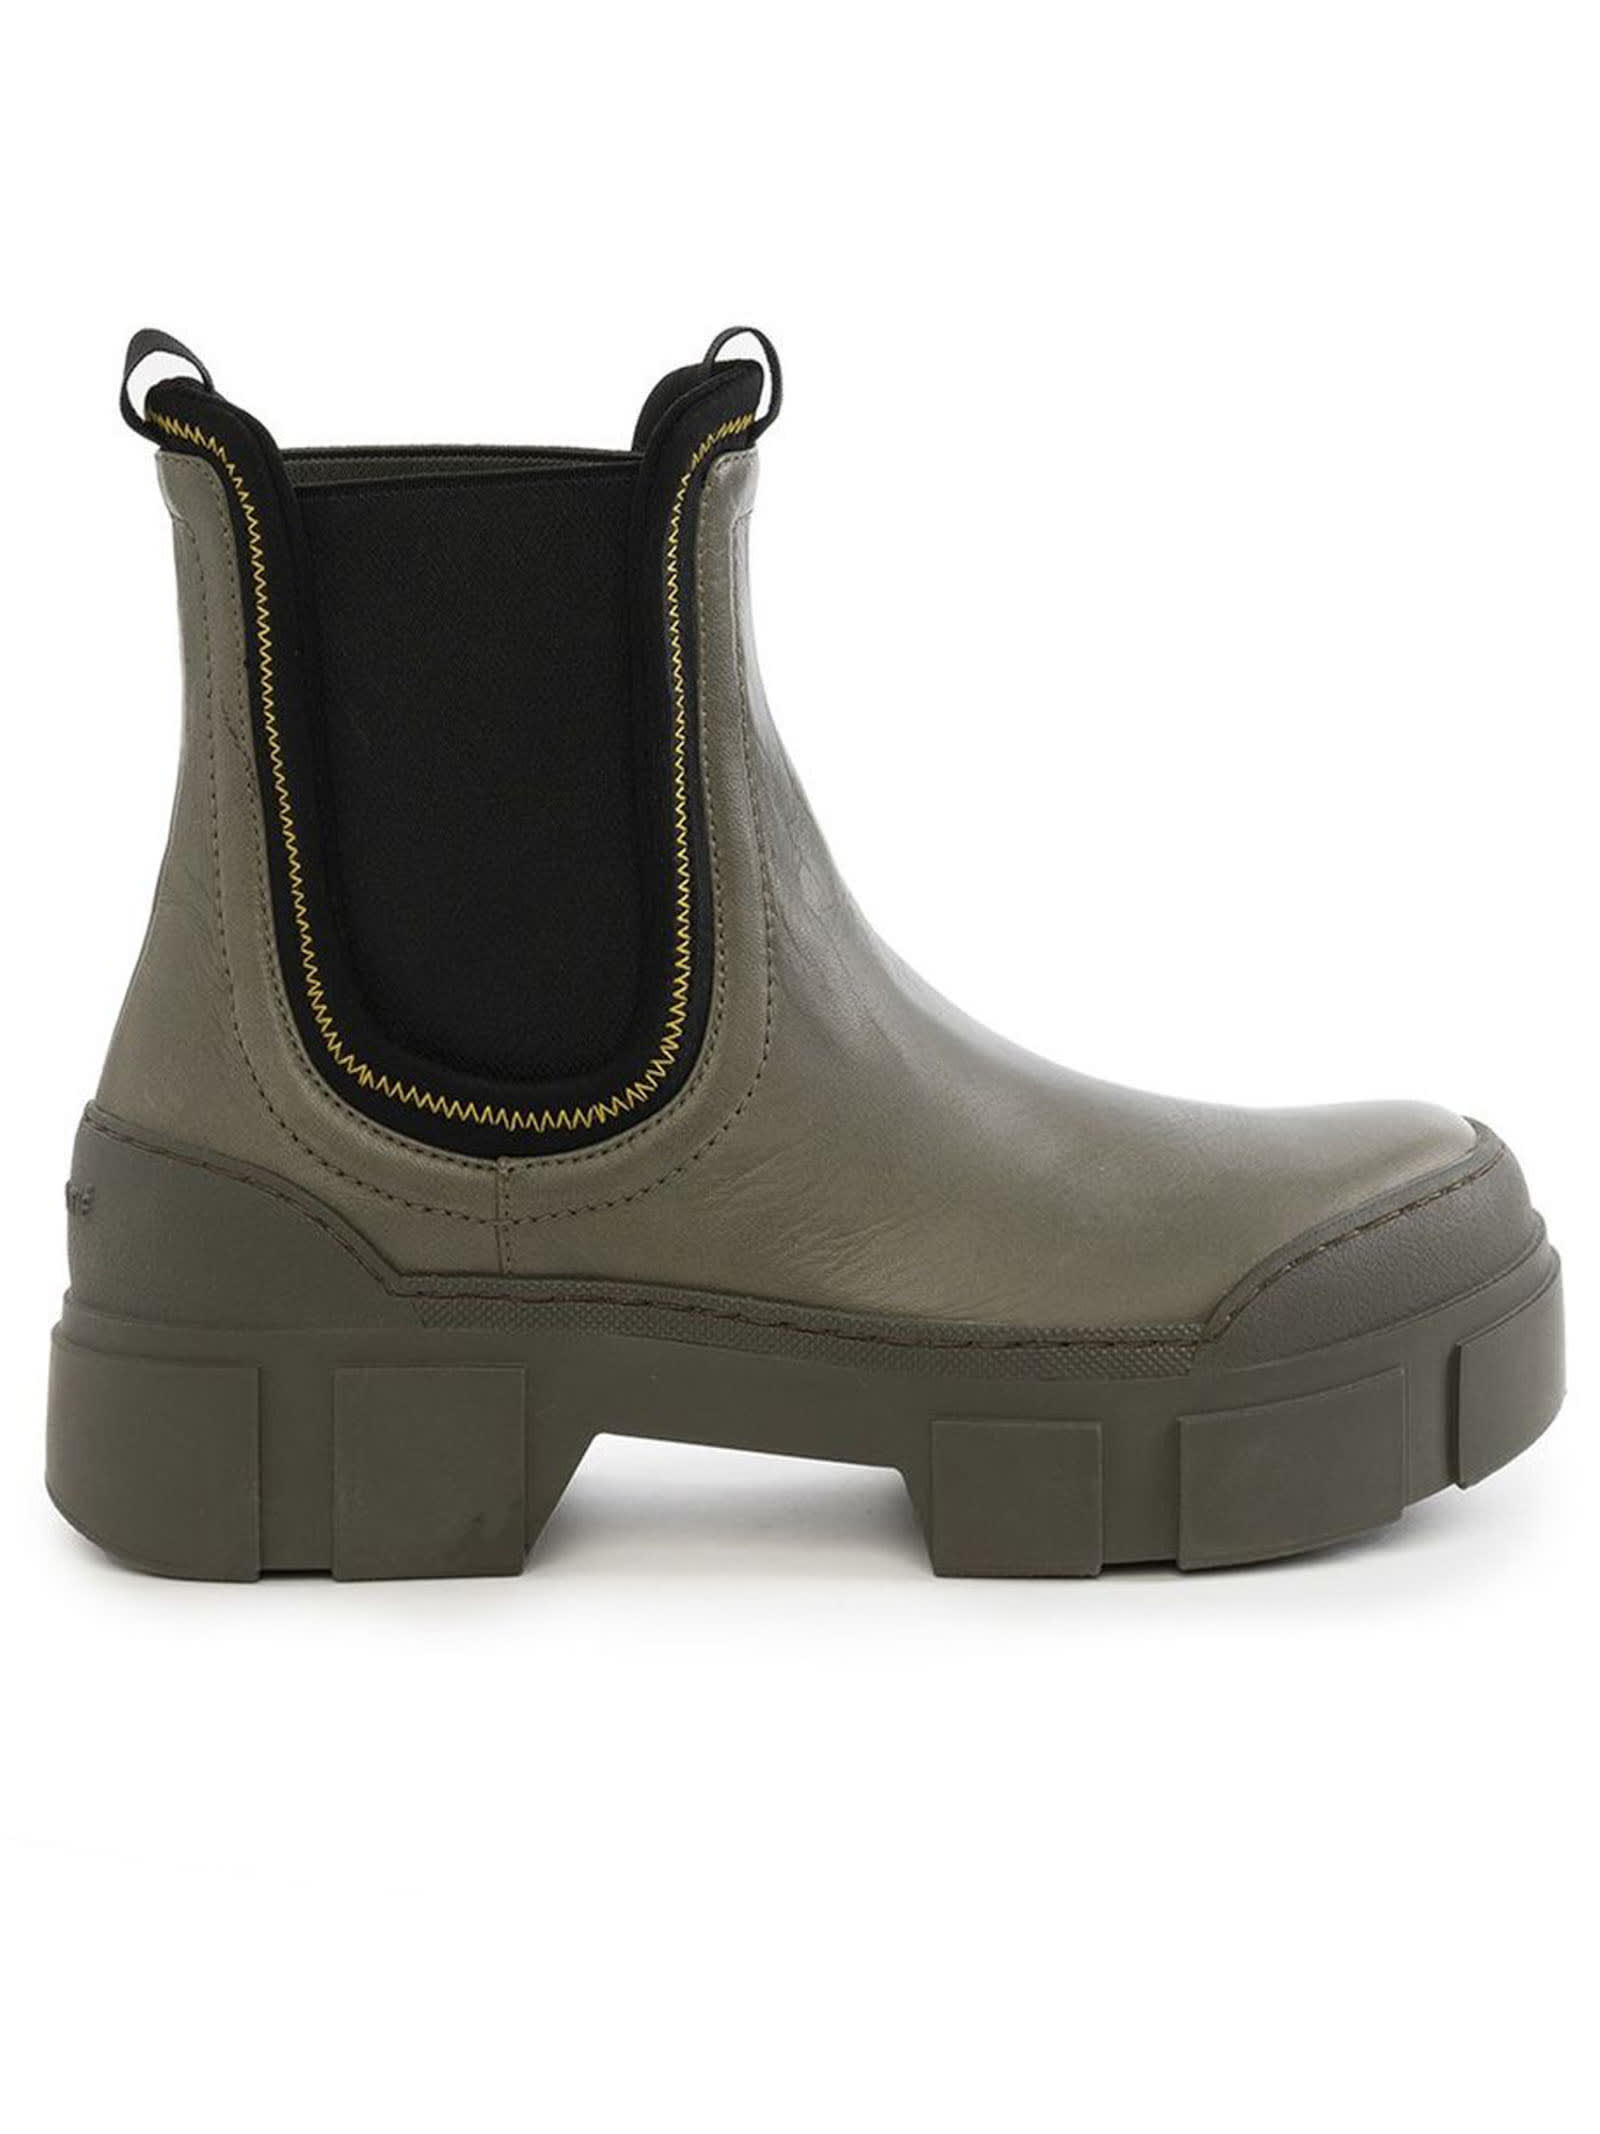 Vic Matié Roccia Beatle Boots In Smooth Green Calfskin